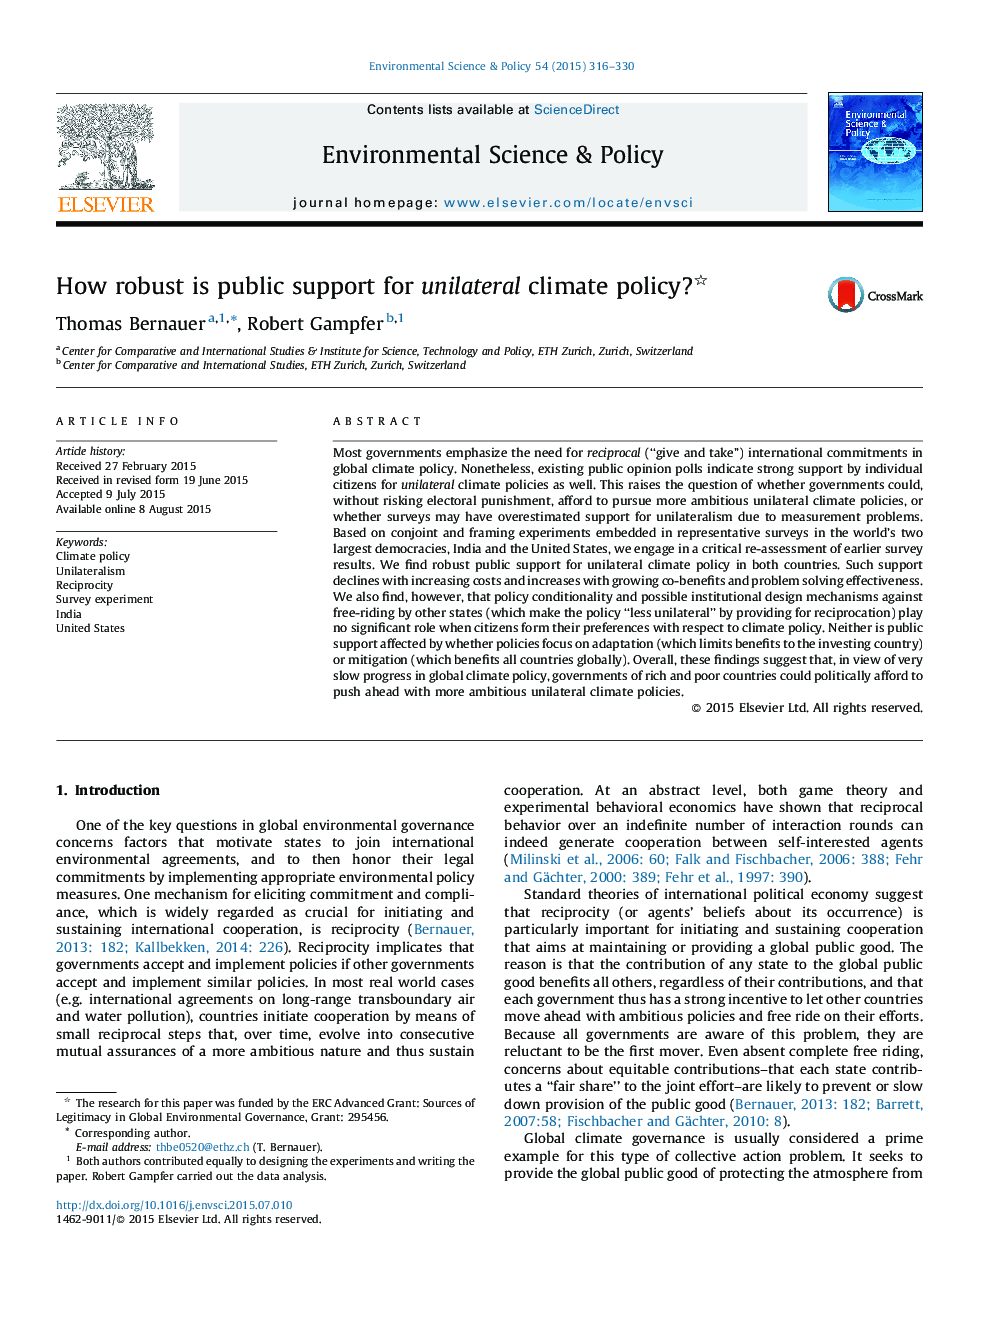 How robust is public support for unilateral climate policy?